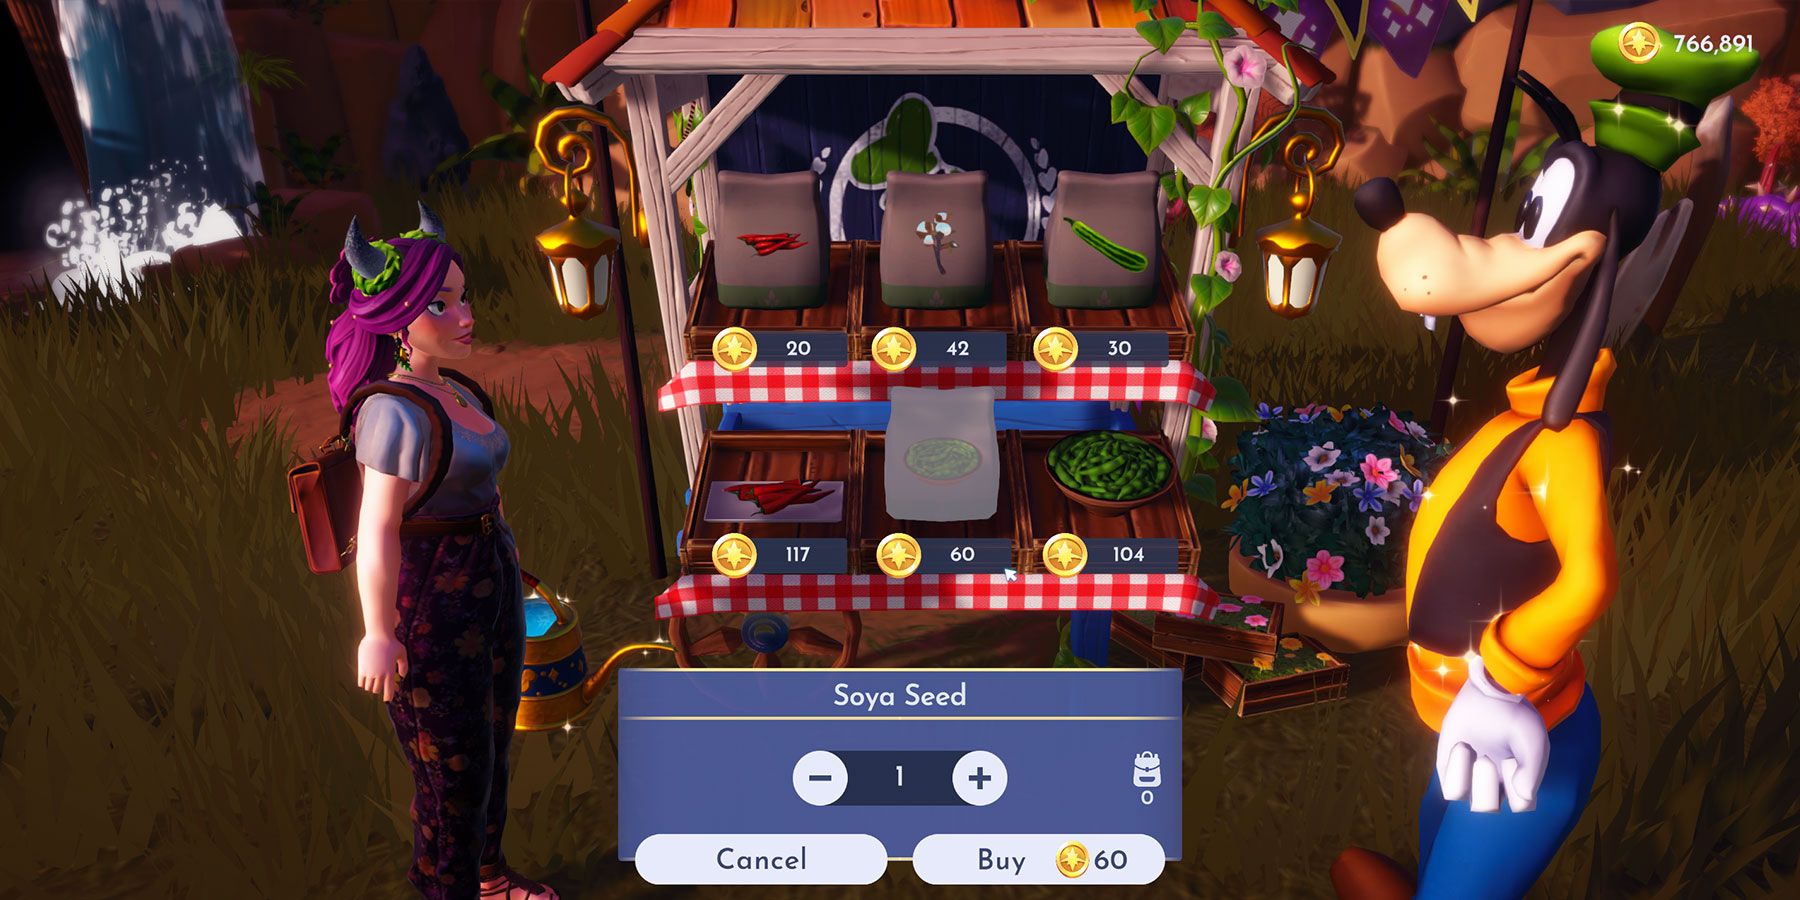 Buy soybean seeds from Goofy's stand at Disney's Dreamlight Valley